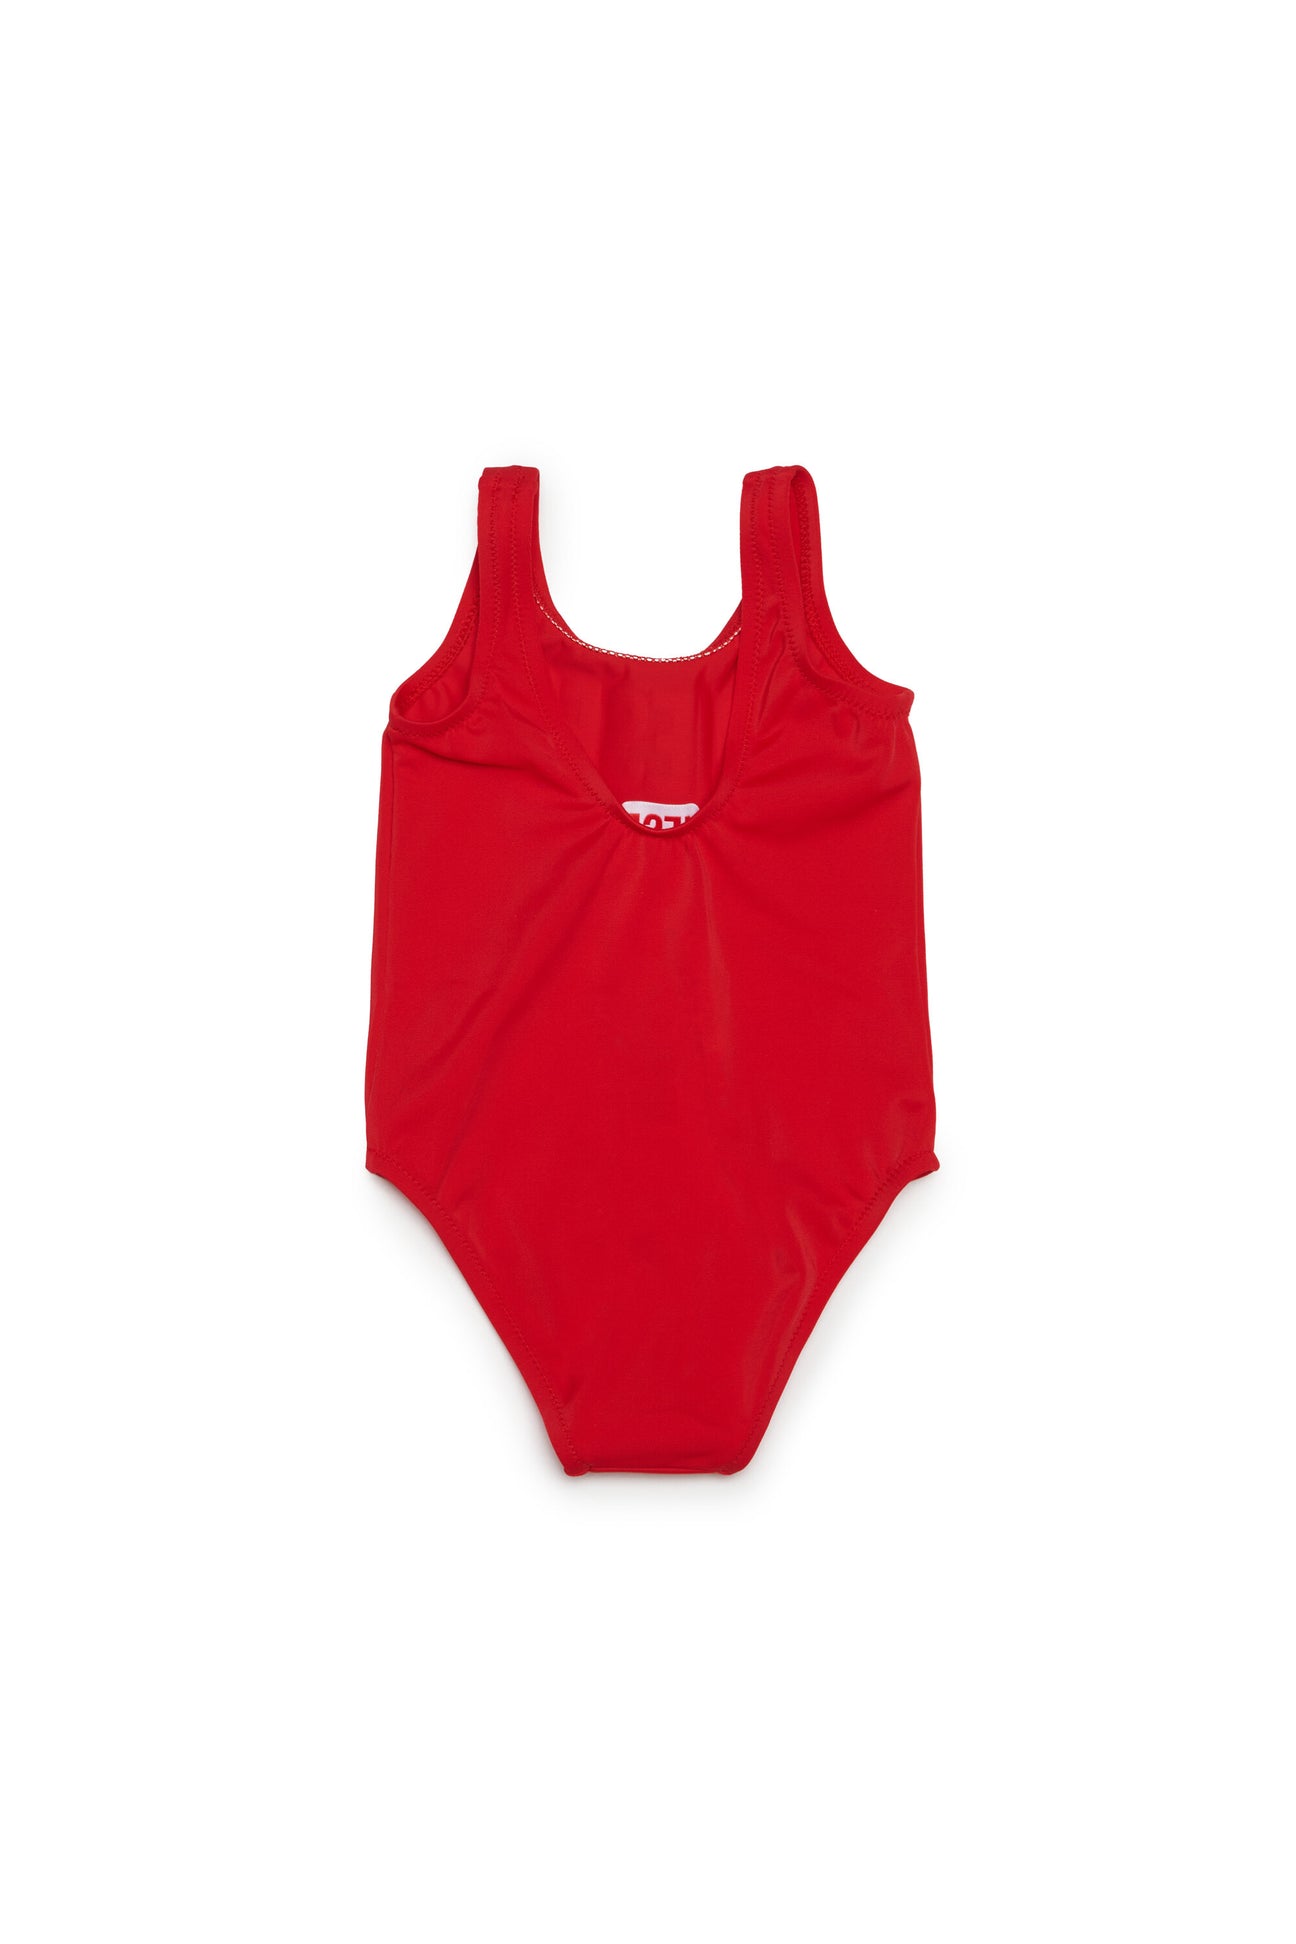 One-piece swimsuit branded with logo One-piece swimsuit branded with logo